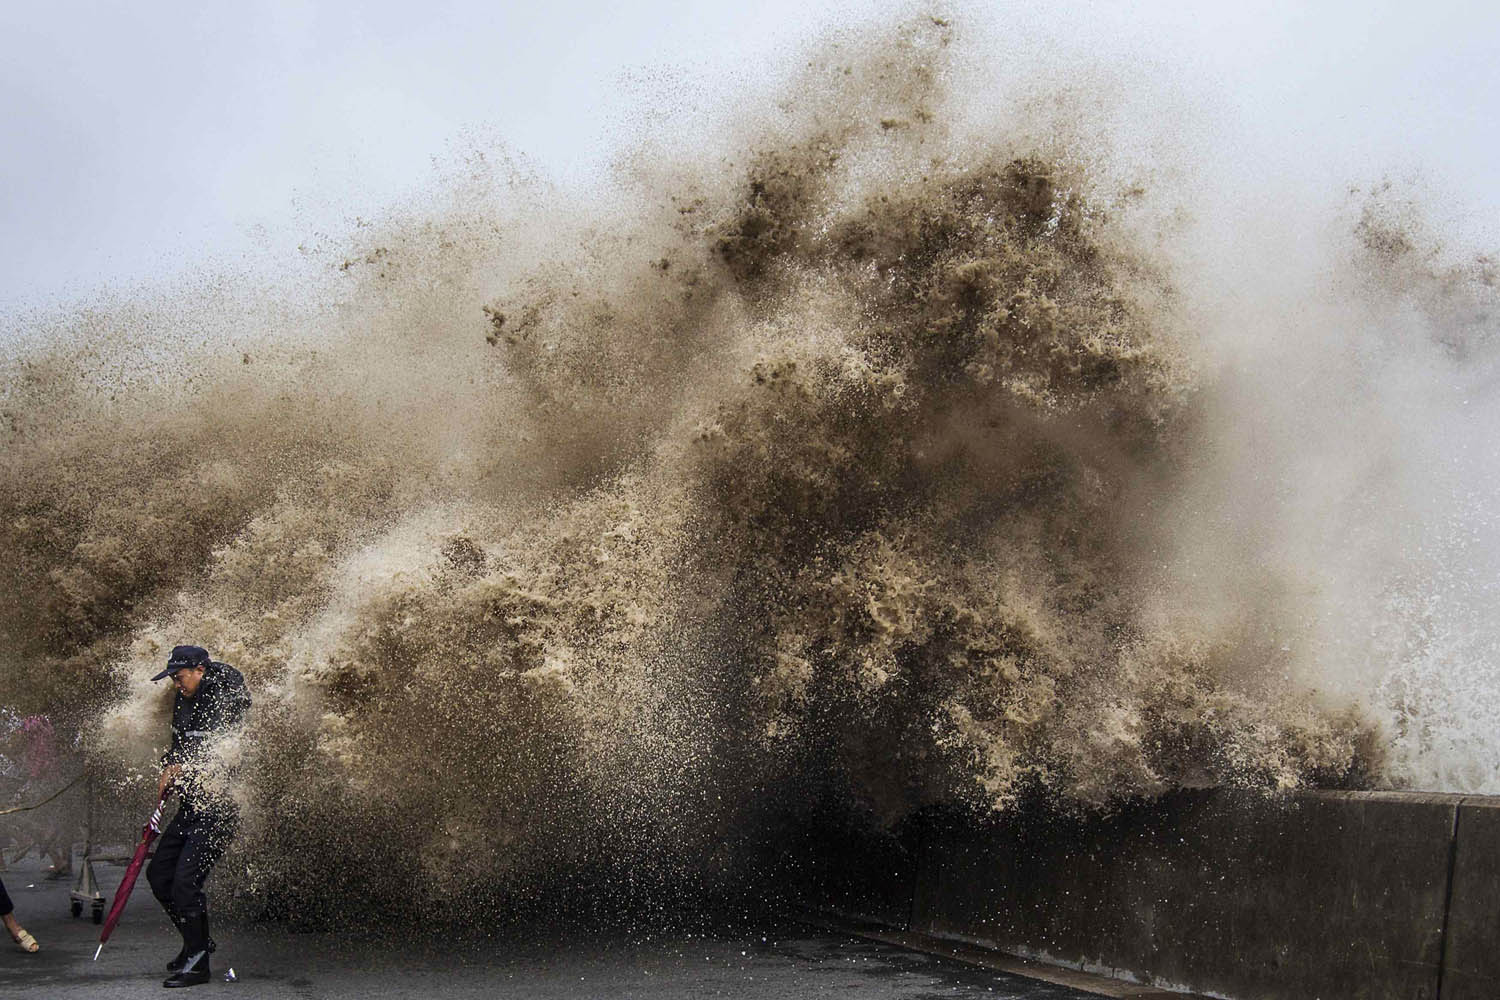 A man dodges tidal waves under the influence of Typhoon Usagi in Hangzhou